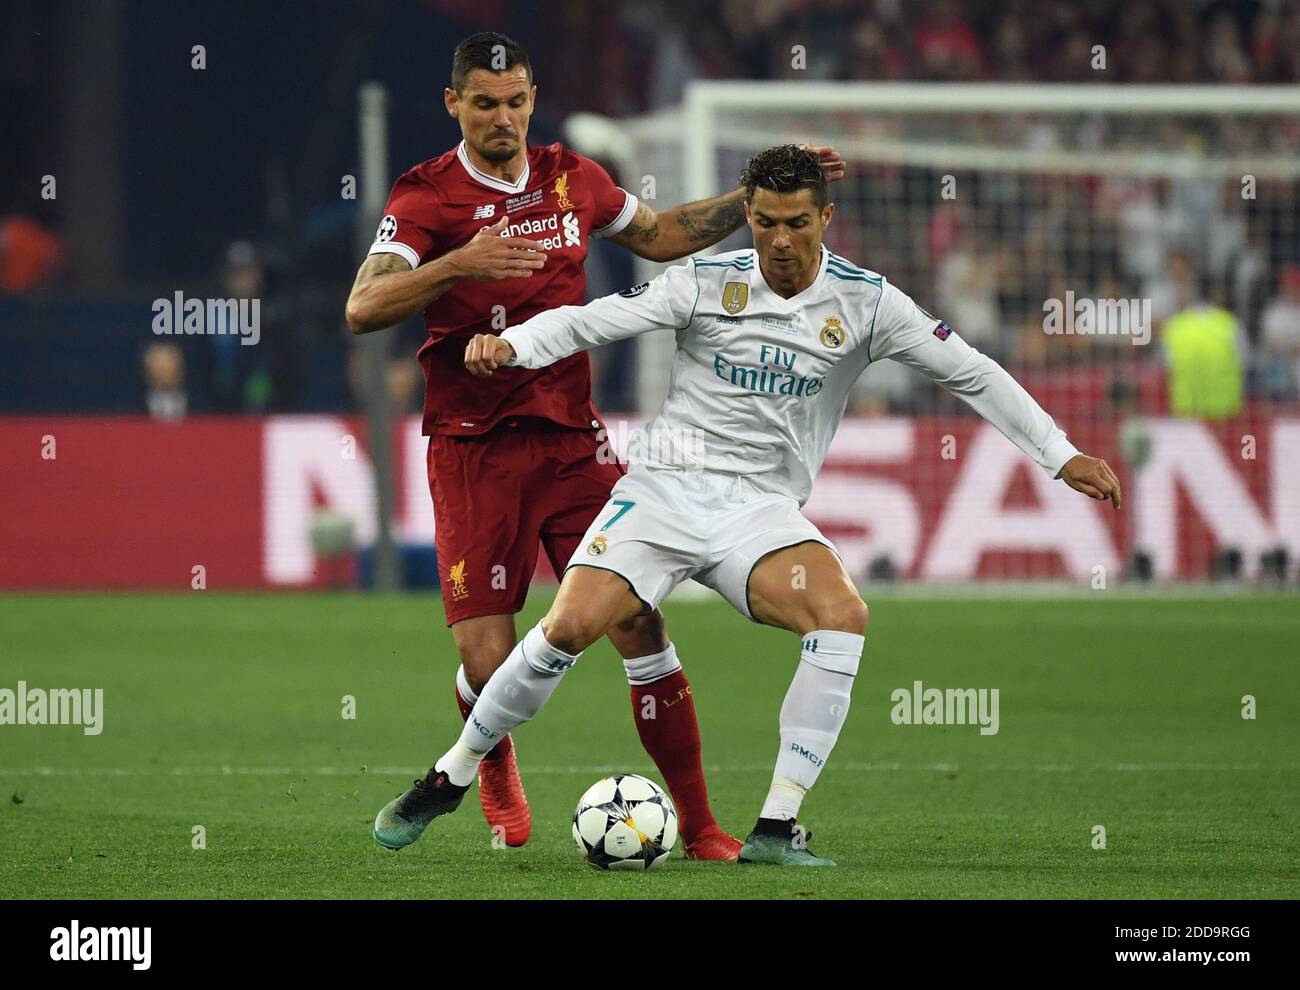 26 May 2018, Ukraine, Kiev: Champions League, Real Madrid vs FC Liverpool, finals at the Olimpiyskiy National Sports Complex. Madrid's Cristiano Ronaldo (R) and Liverpool's Dejan Lovren vie for the ball. Photo by Ina Fassbender/DPA/ABACAPRESS.COM Stock Photo